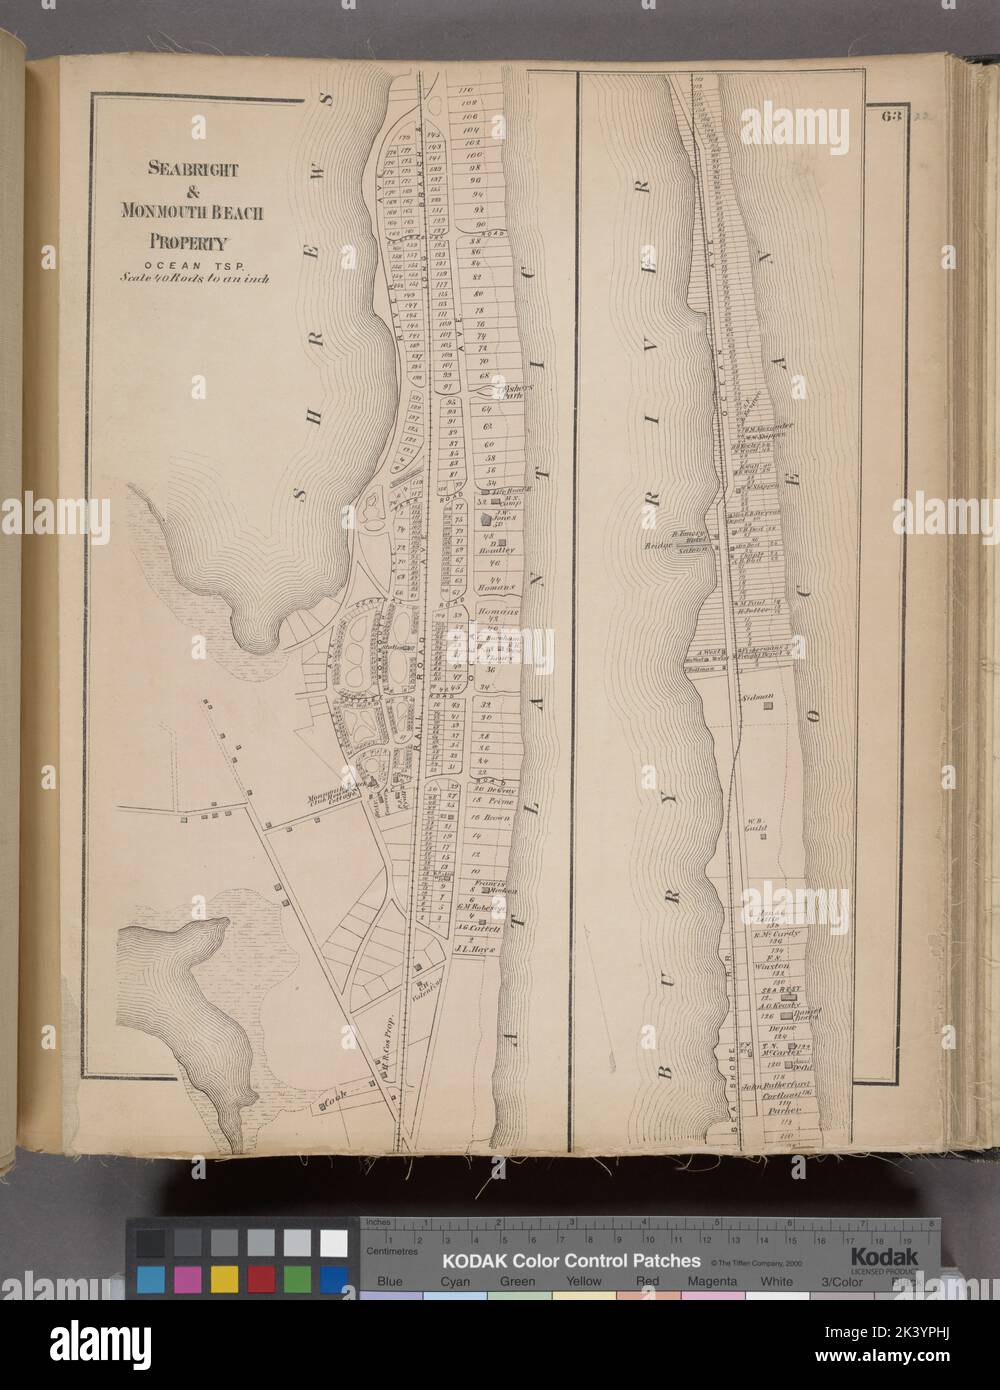 Seabright & Monmouth Beach Property Villages Cartographic. Atlases, Maps. 1873. Lionel Pincus and Princess Firyal Map Division. Monmouth Couty (N.J.) , Description and travel, Real property , New Jersey , Monmouth County Stock Photo